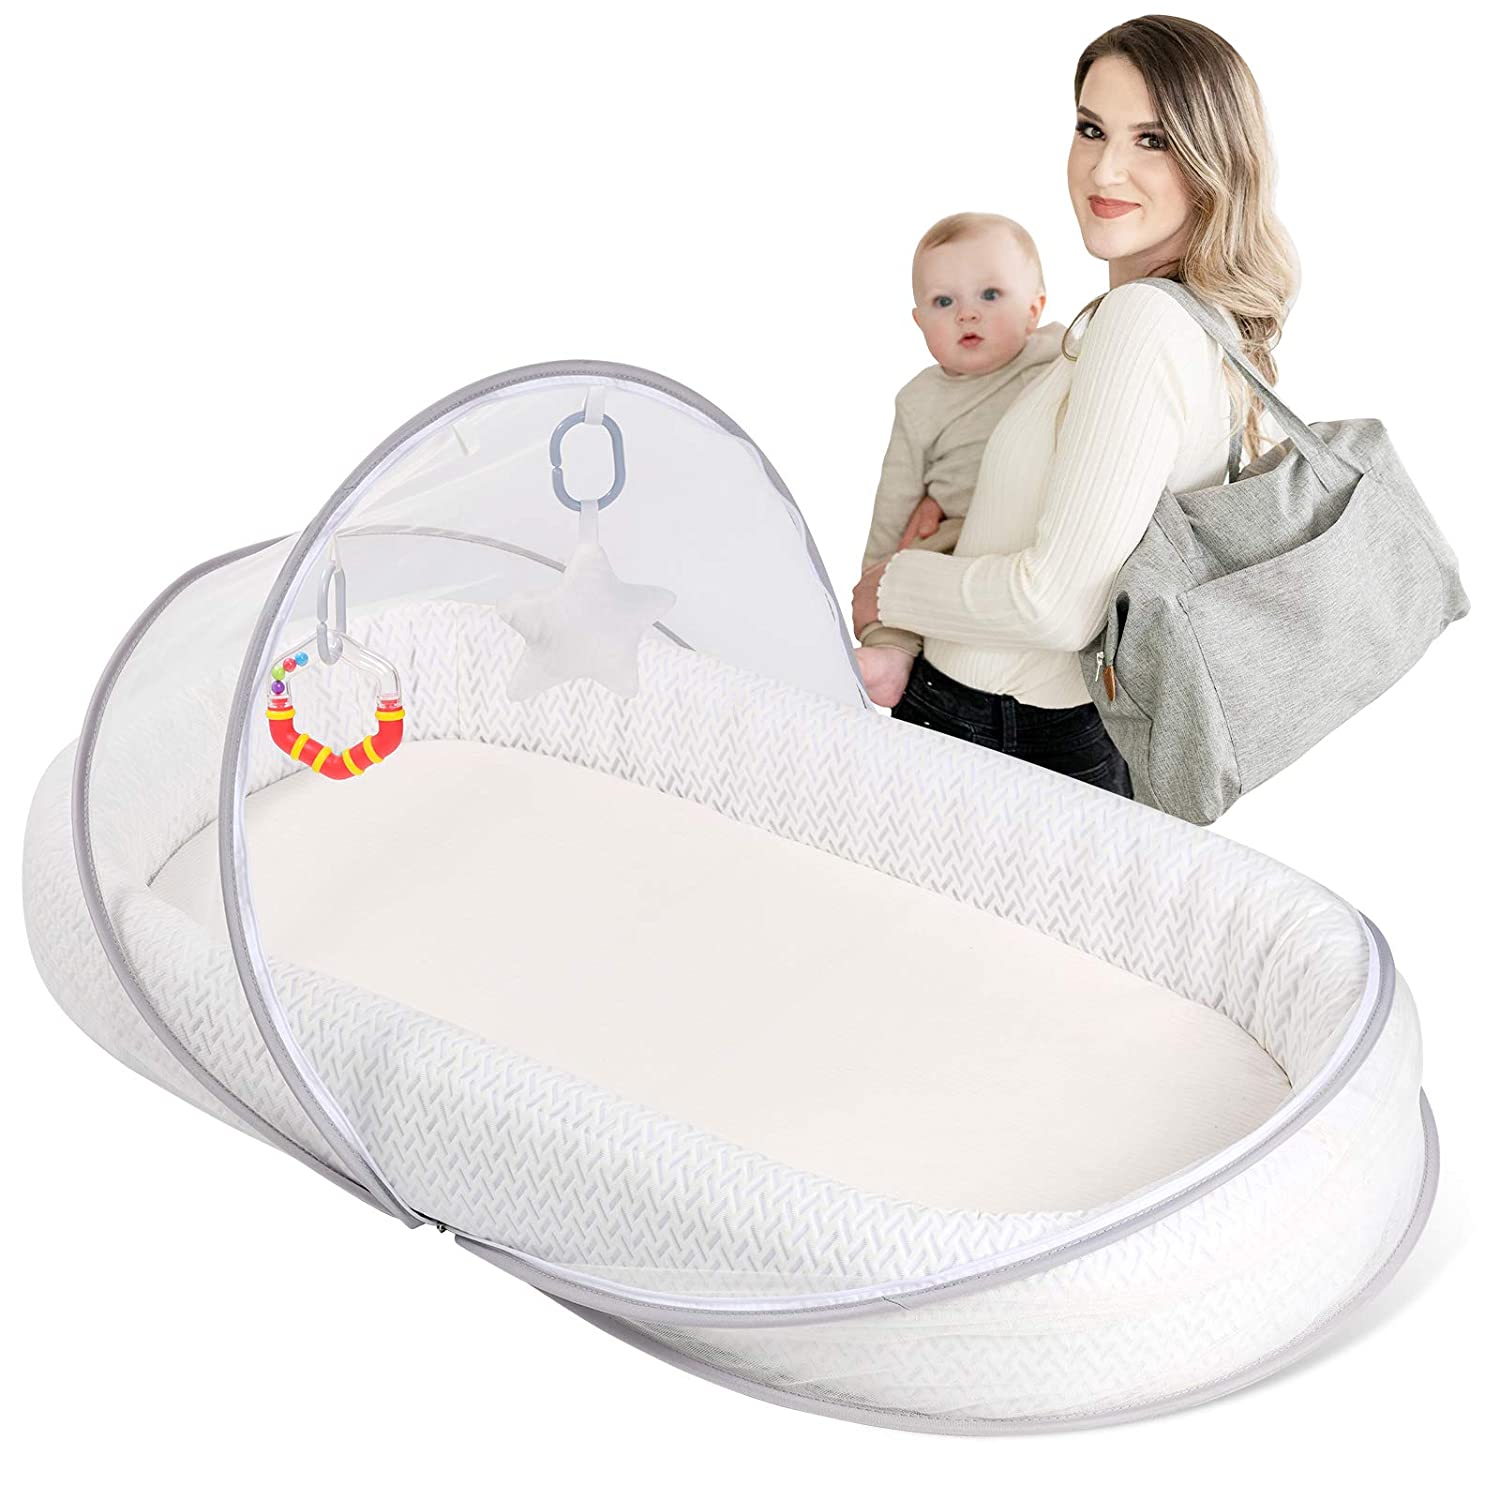 5. Lupantte Inflatable Portable Baby Lounger